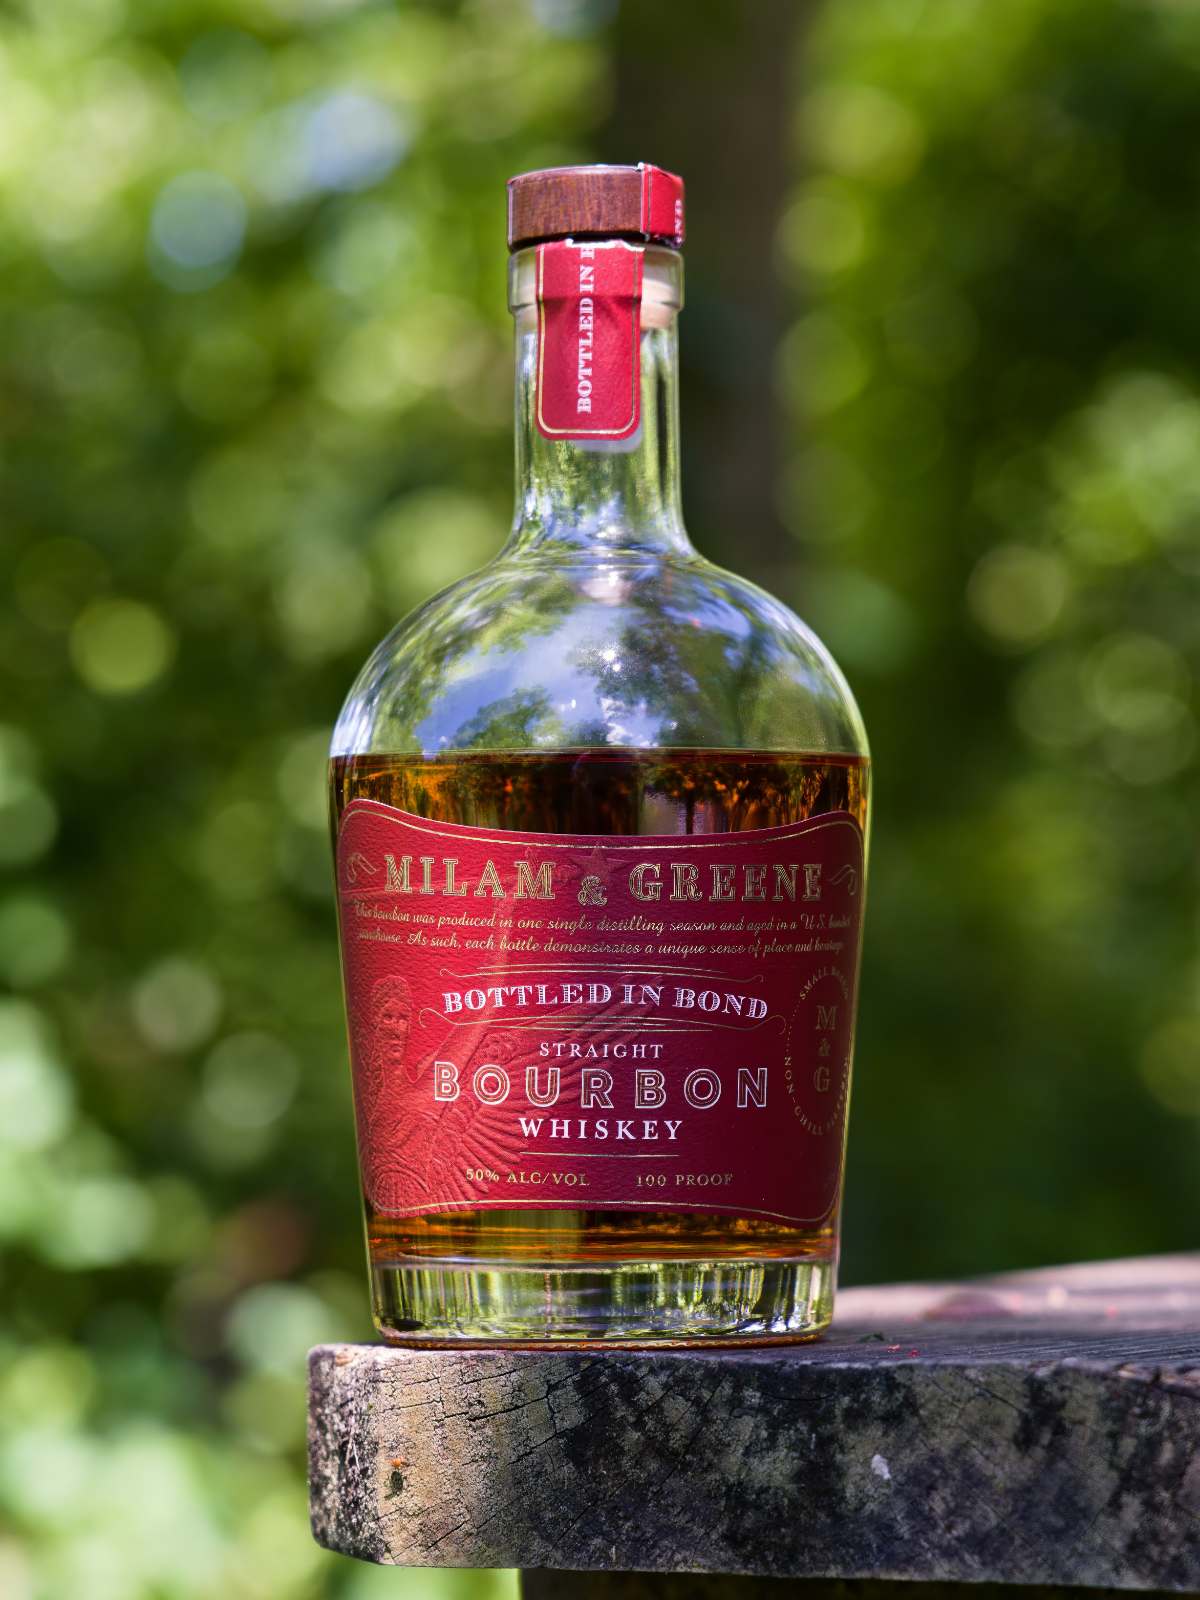 Milam and greene bottled in bond bourbon featured